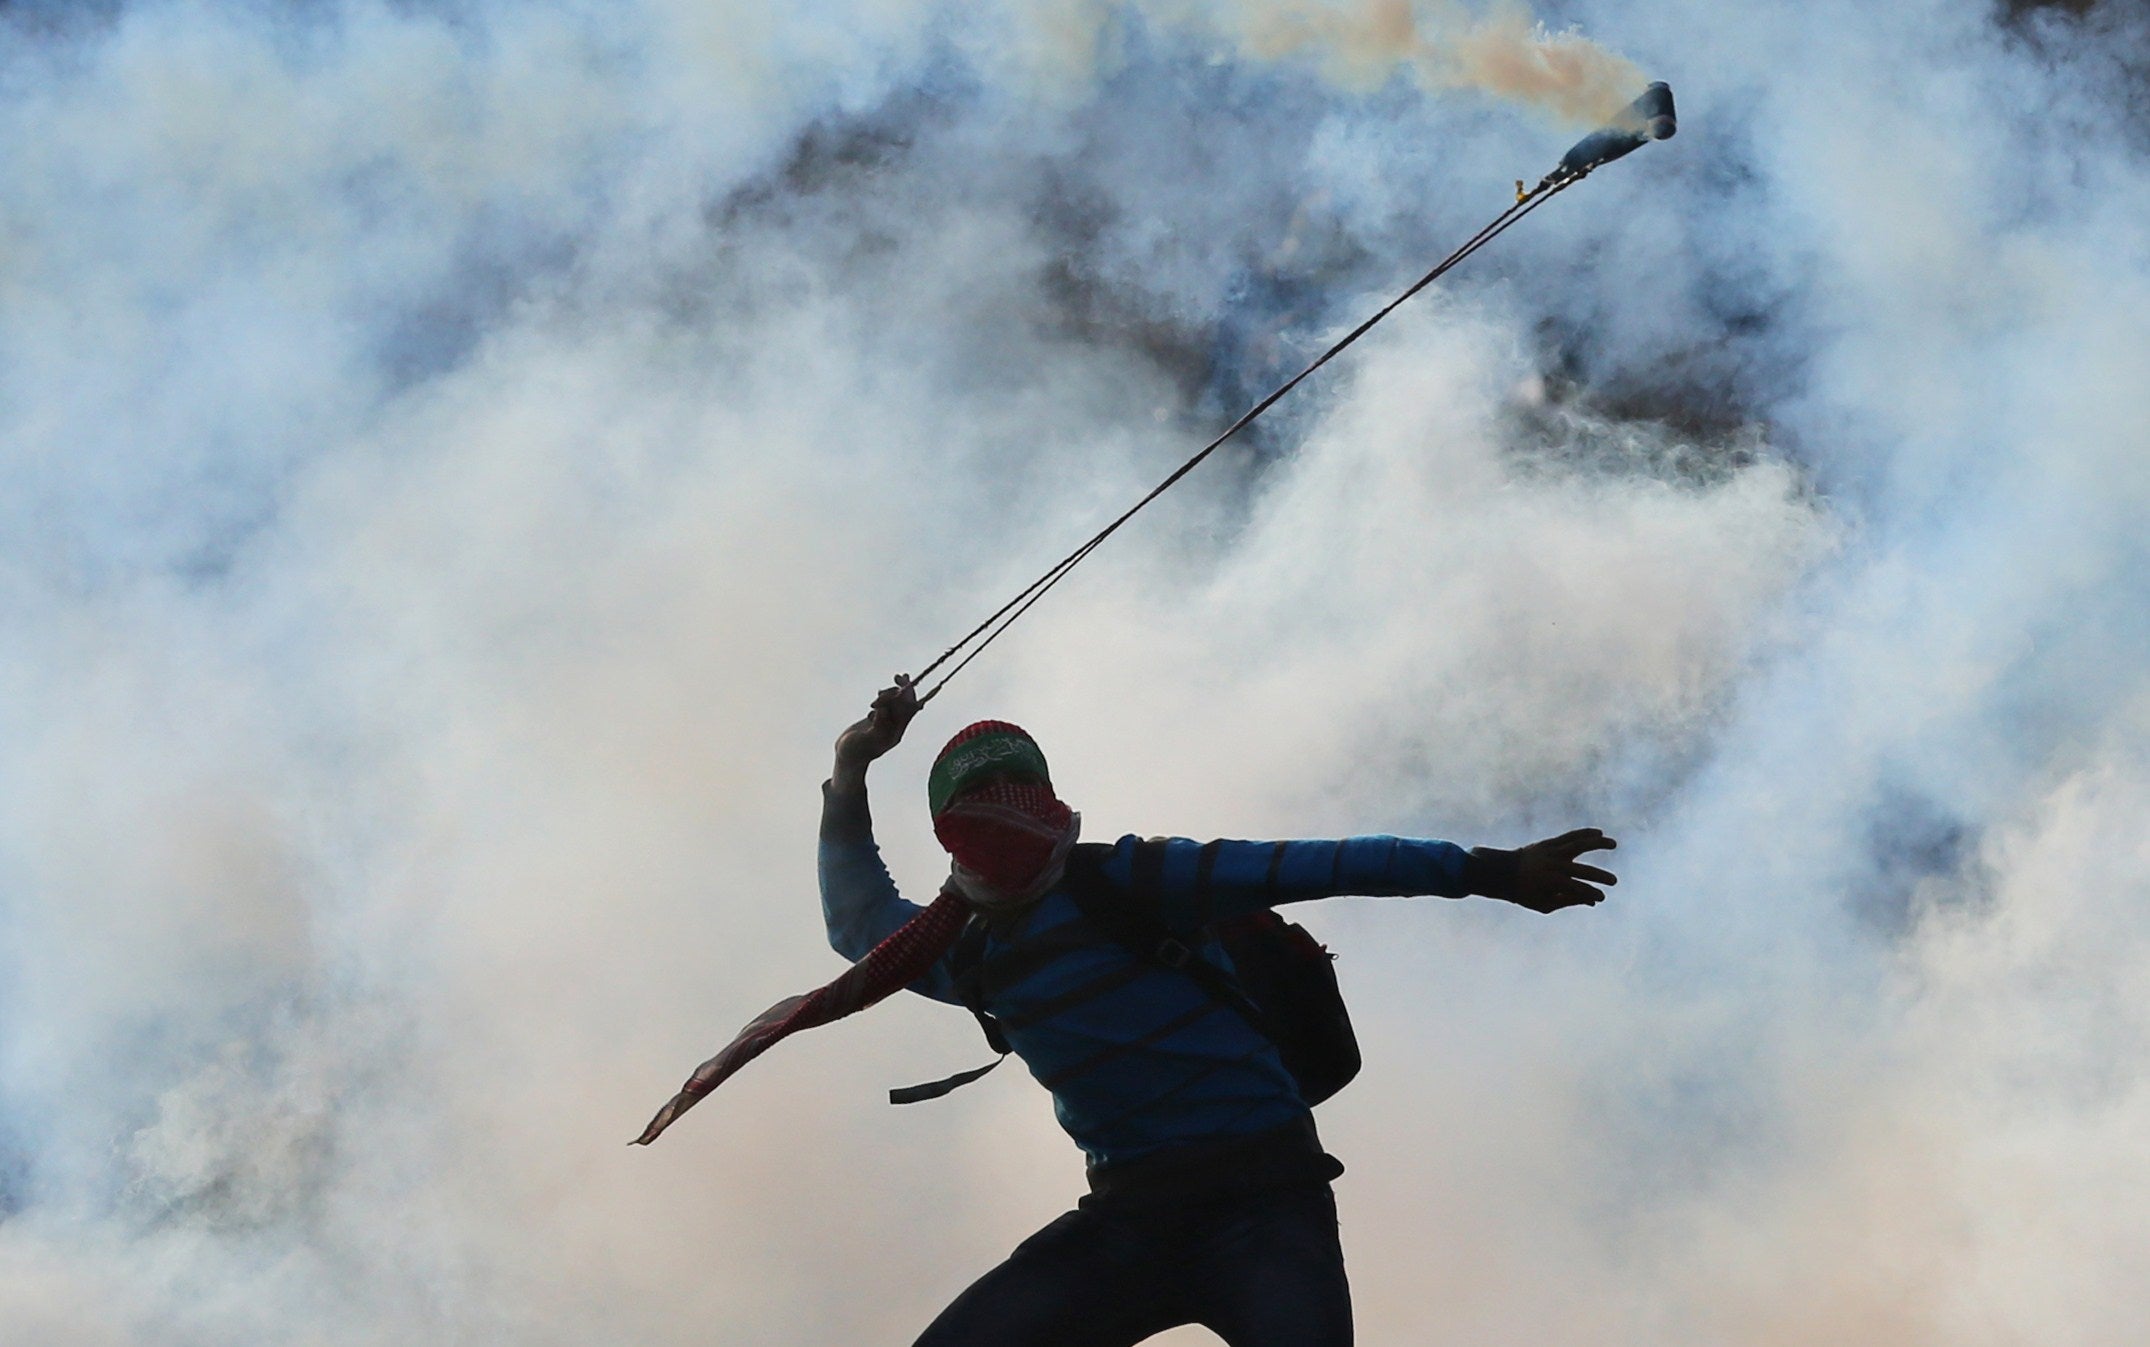 A Palestinian youth uses a slingshot to throw back a tear gas canister towards Israeli forces